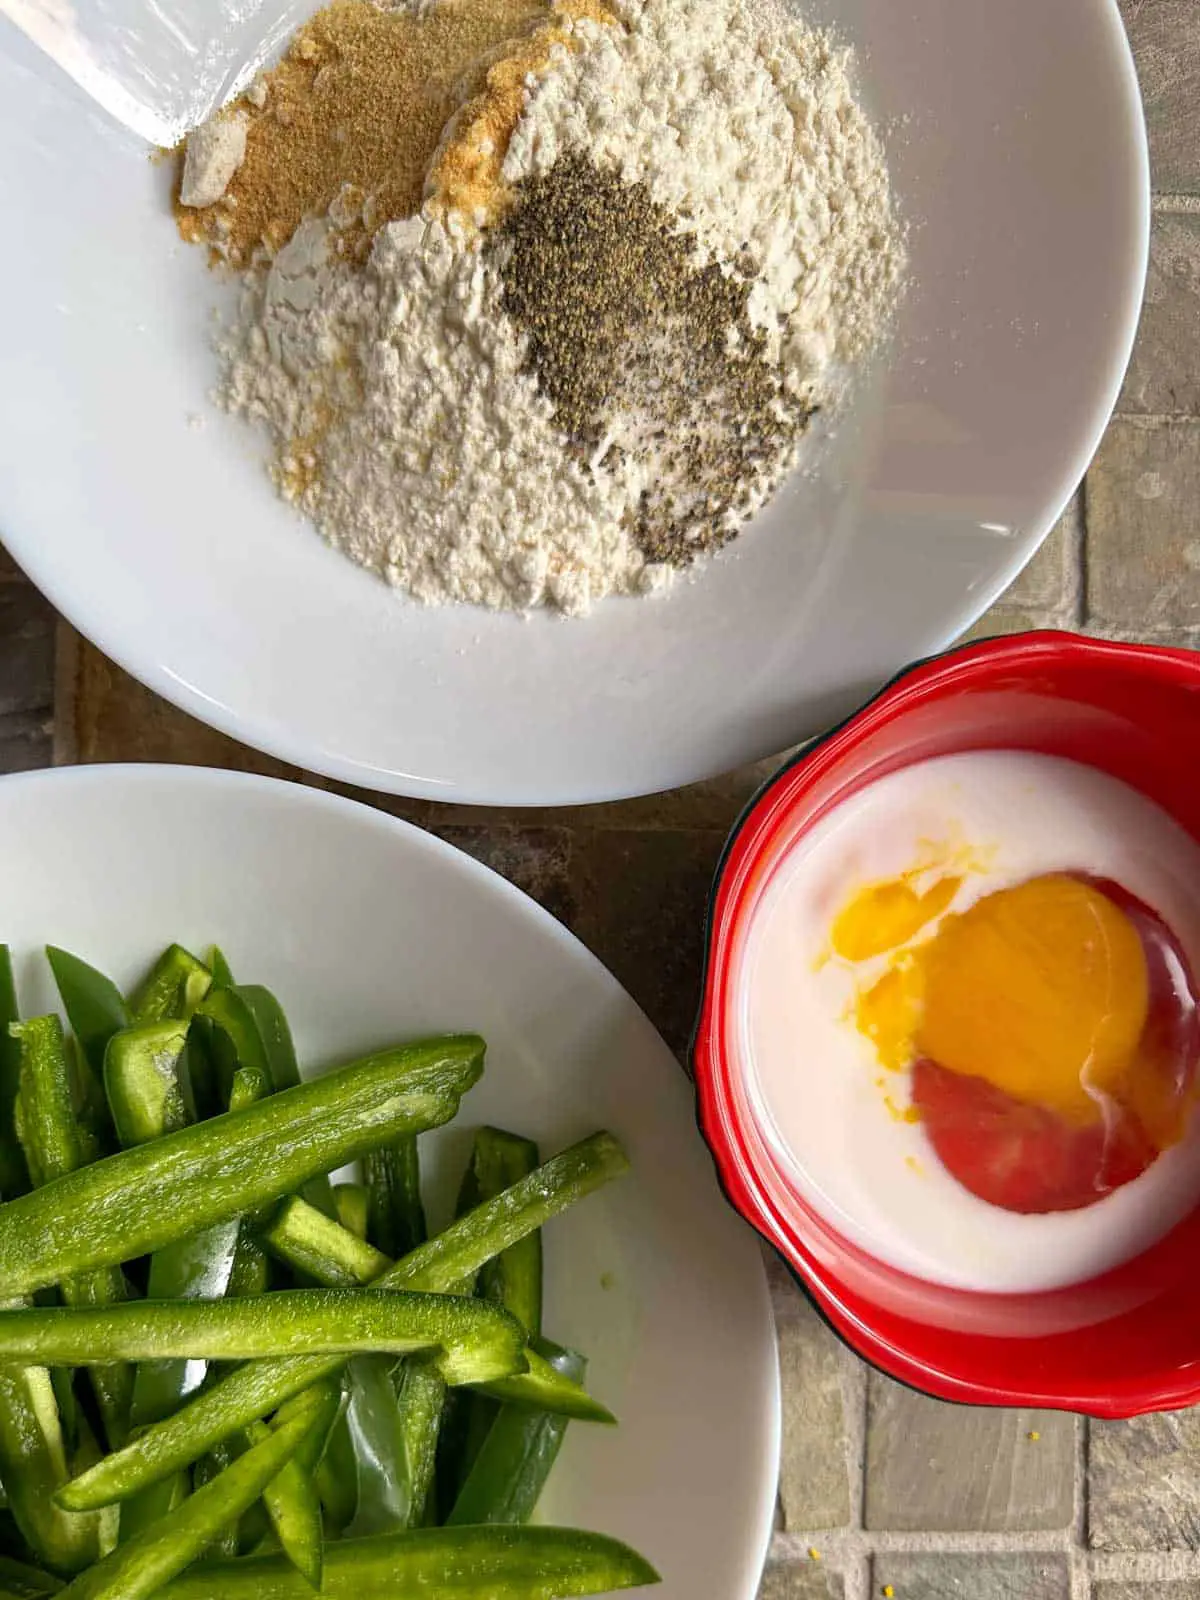 A white bowl containing flour and seasonings and a white bowl containing thin slices of jalapeños. There is also a small red bowl containing an egg and milk.